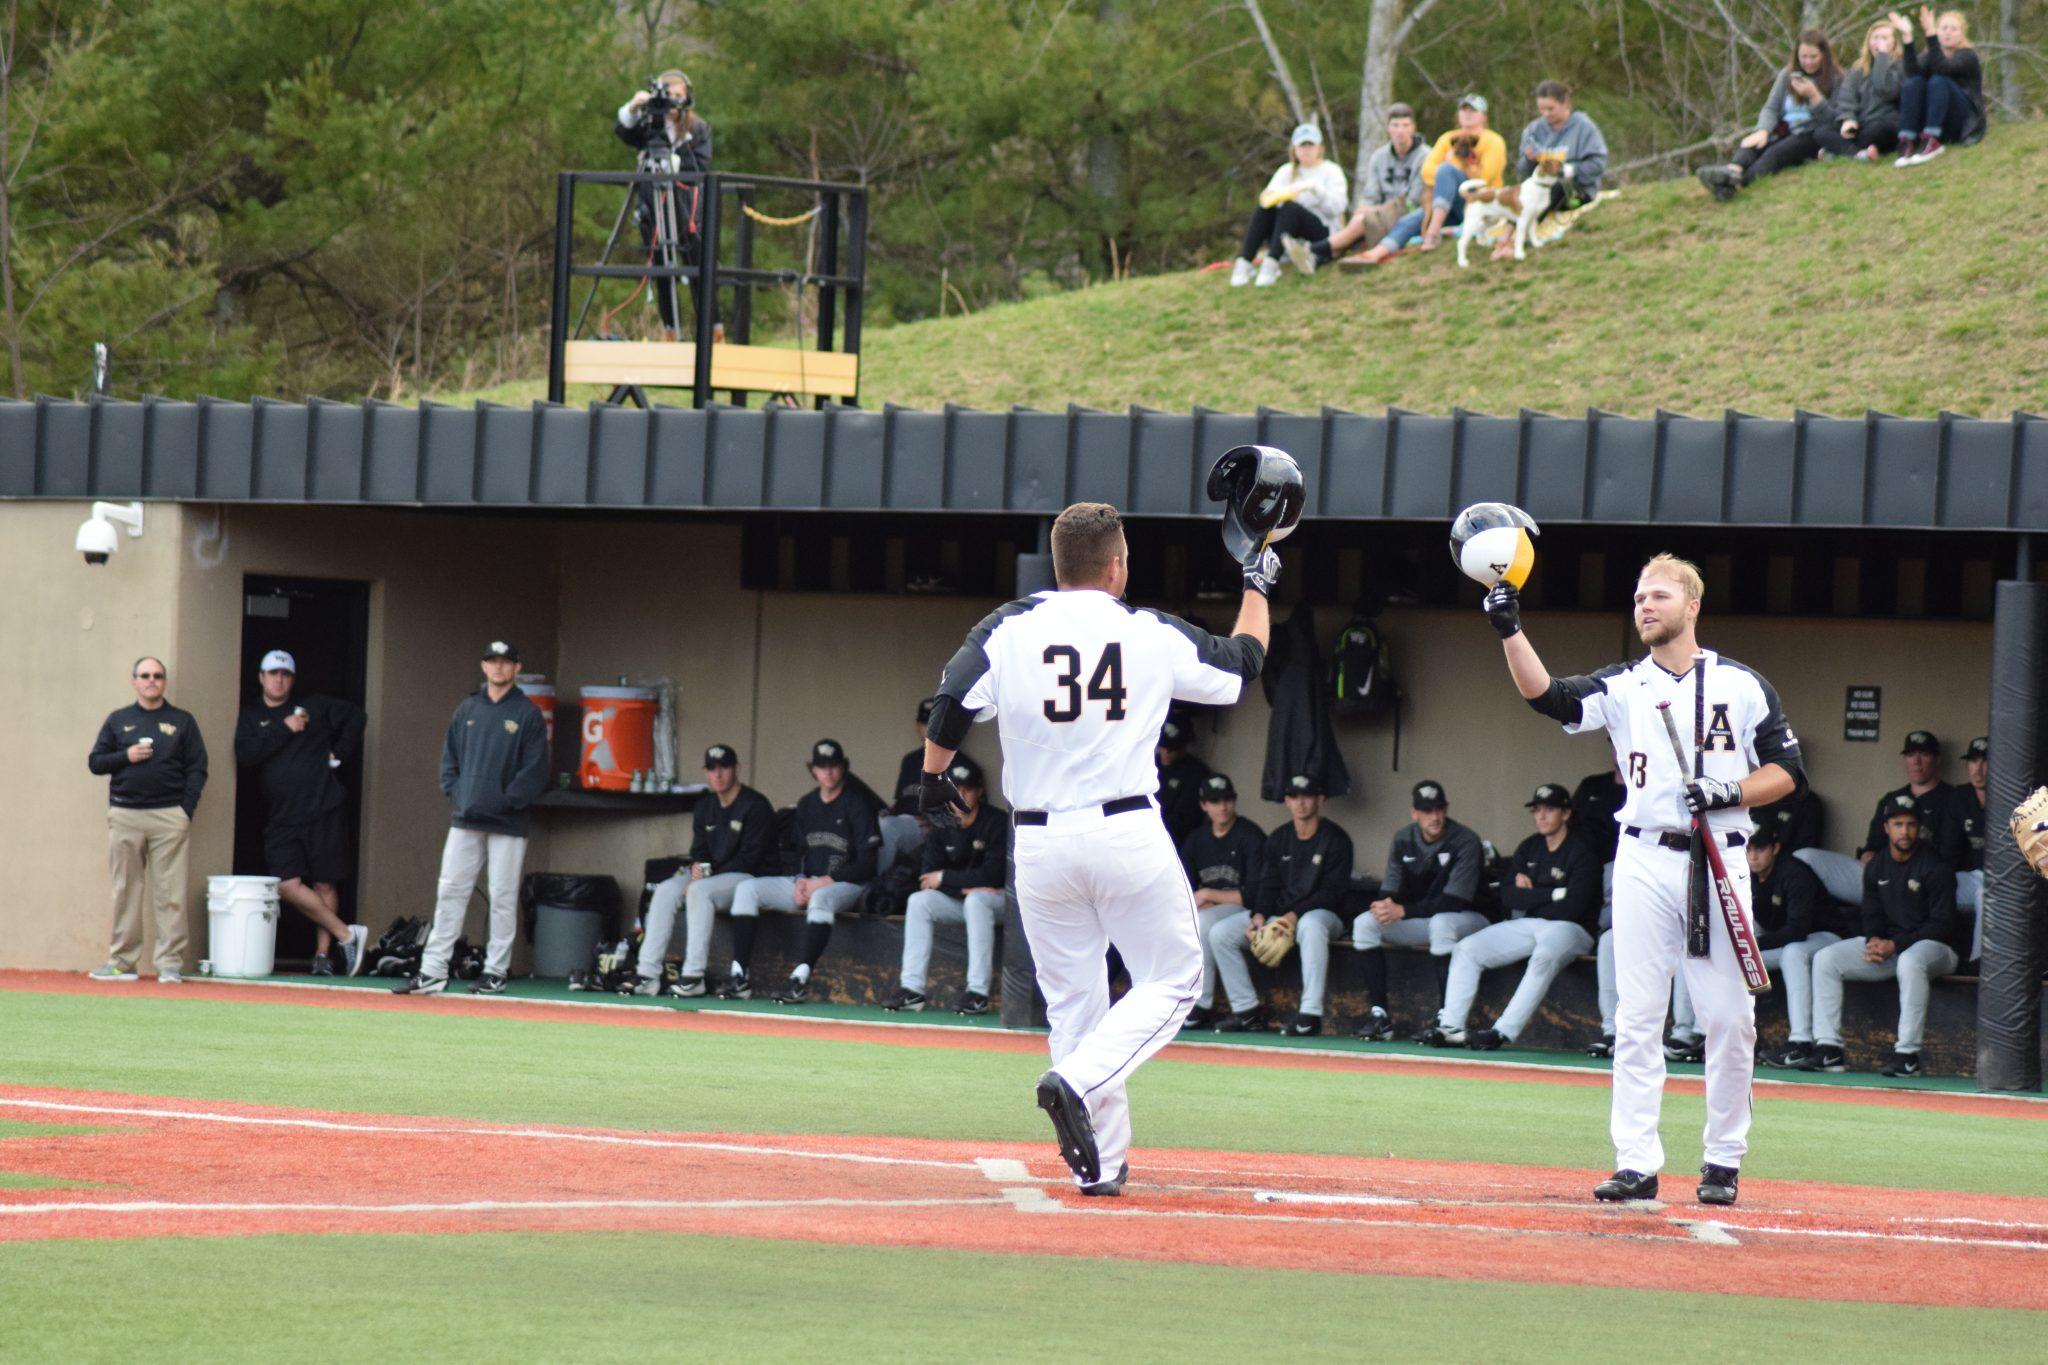 Conner Leonard hit a home run in the bottom of the fifth inning to put App State up over Wake Forest. 
